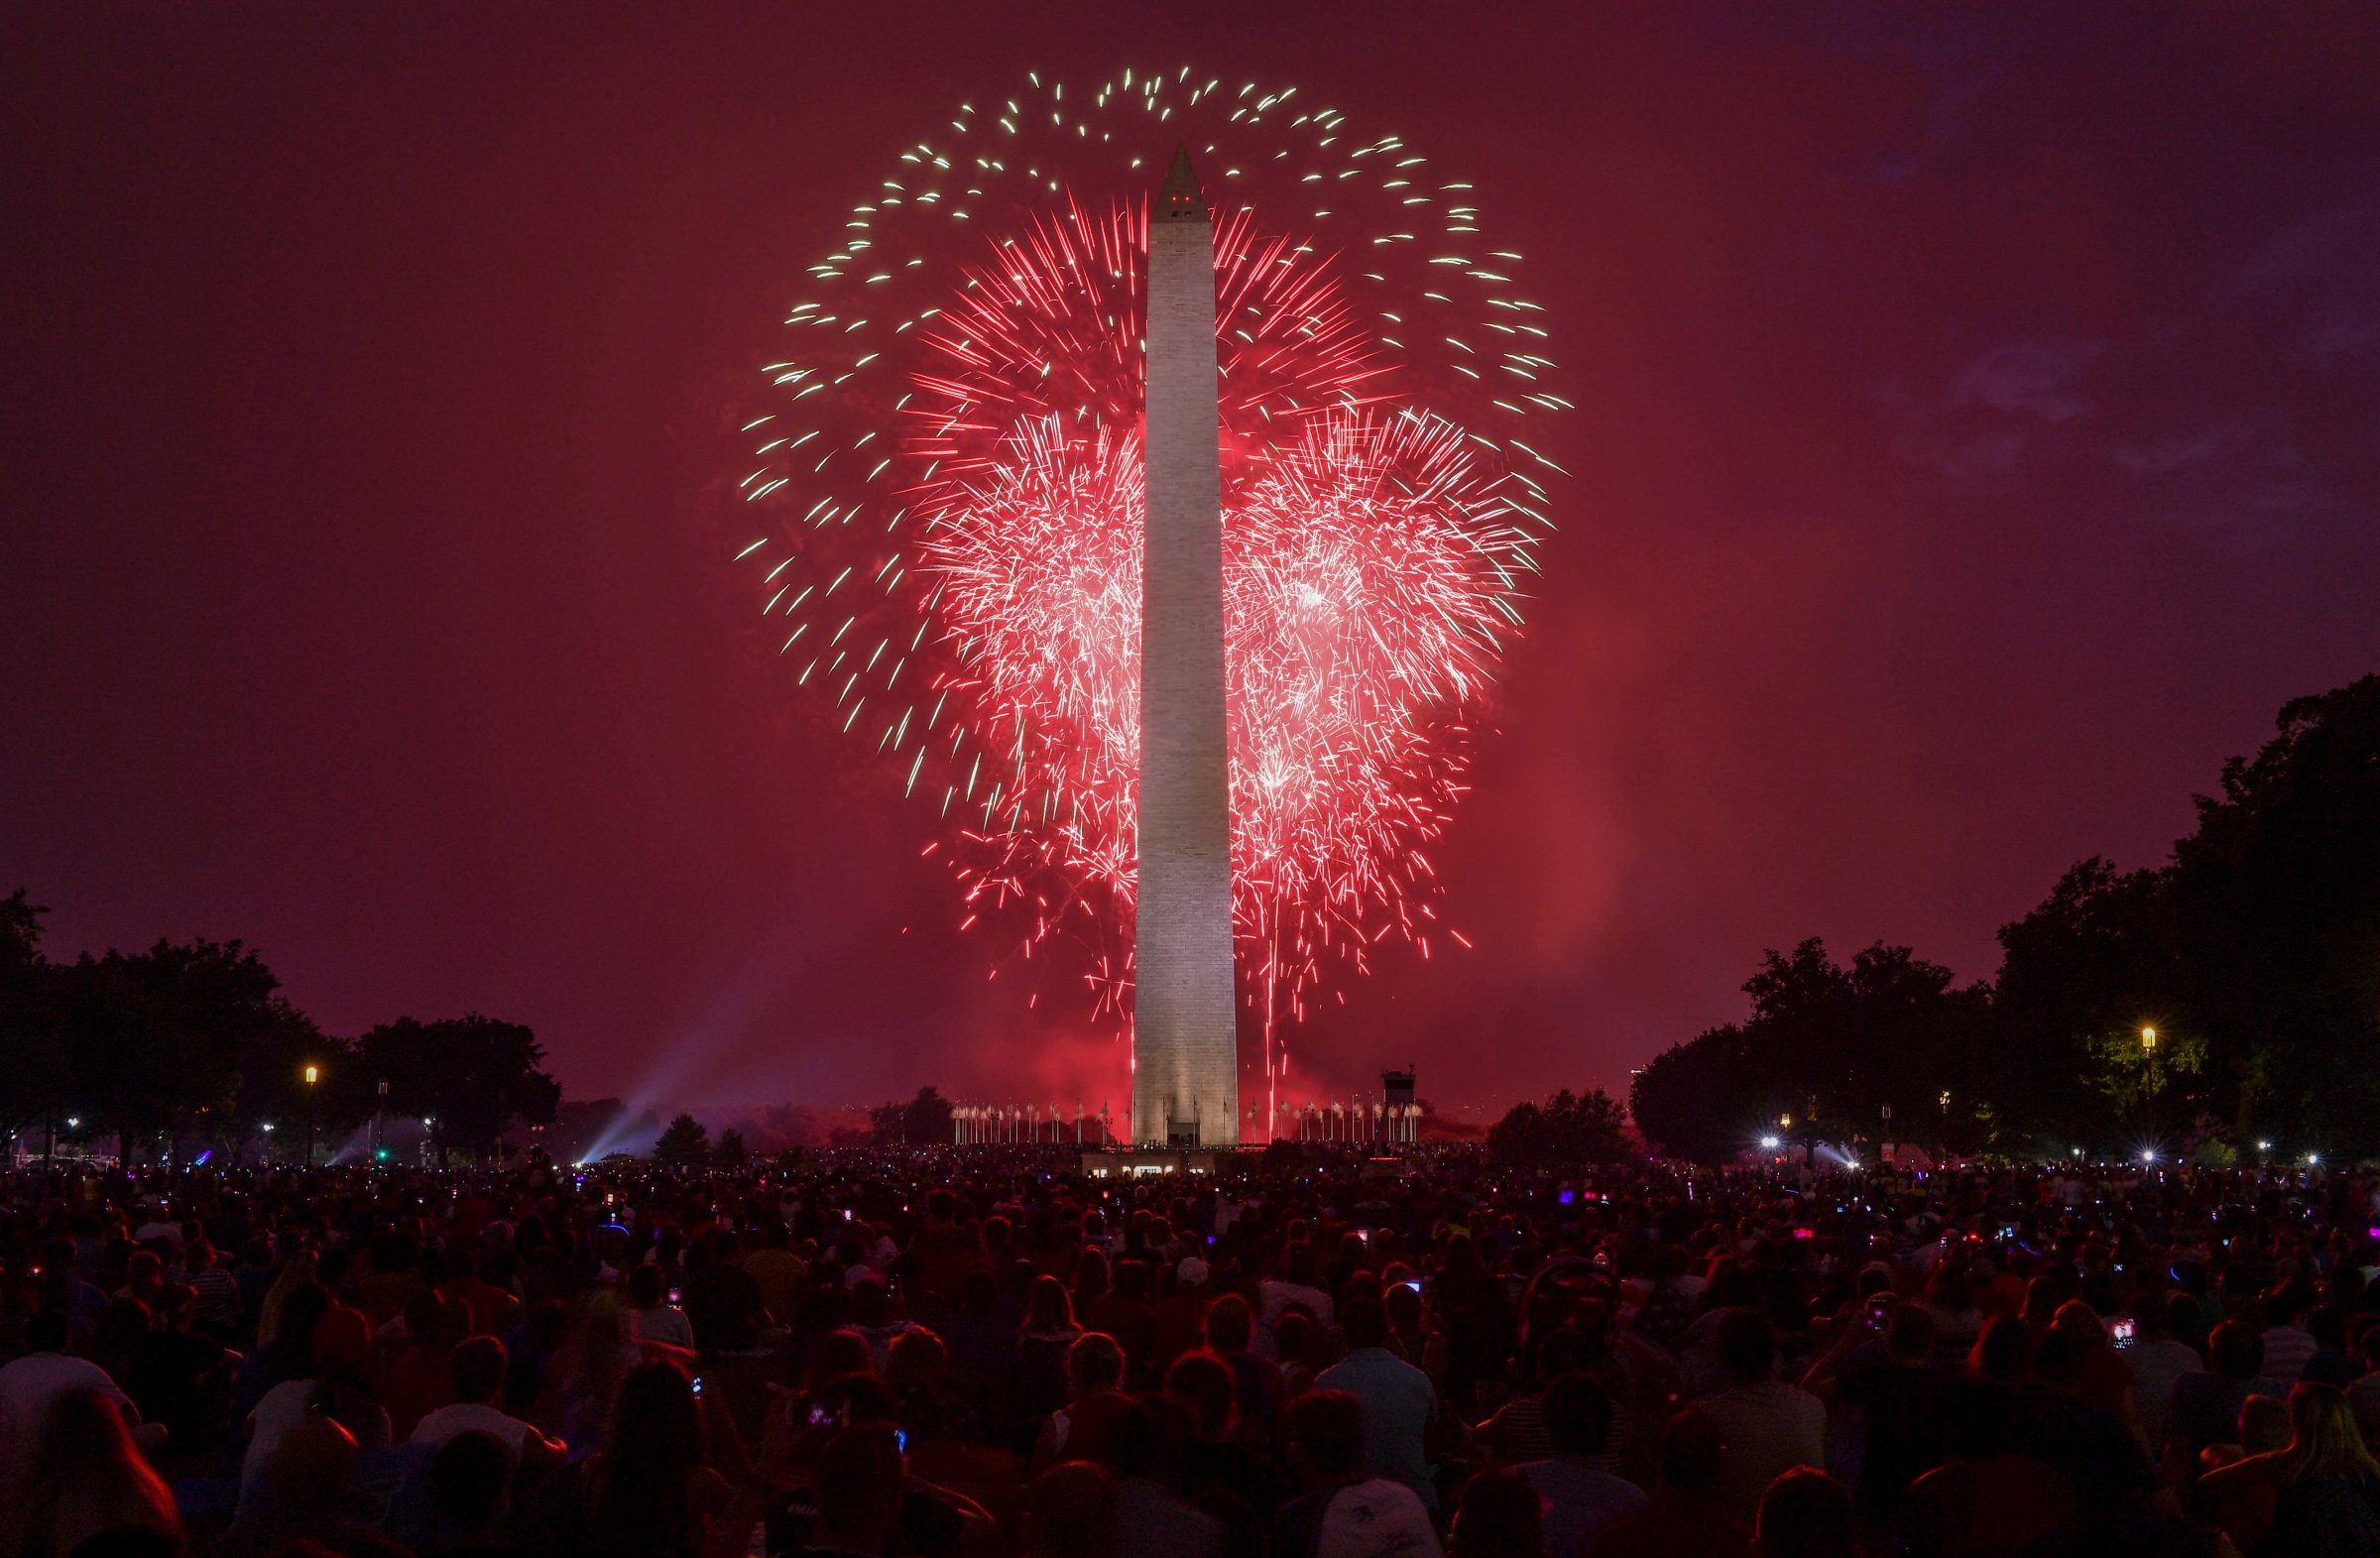 Fireworks in Washington, DC on the National Mall